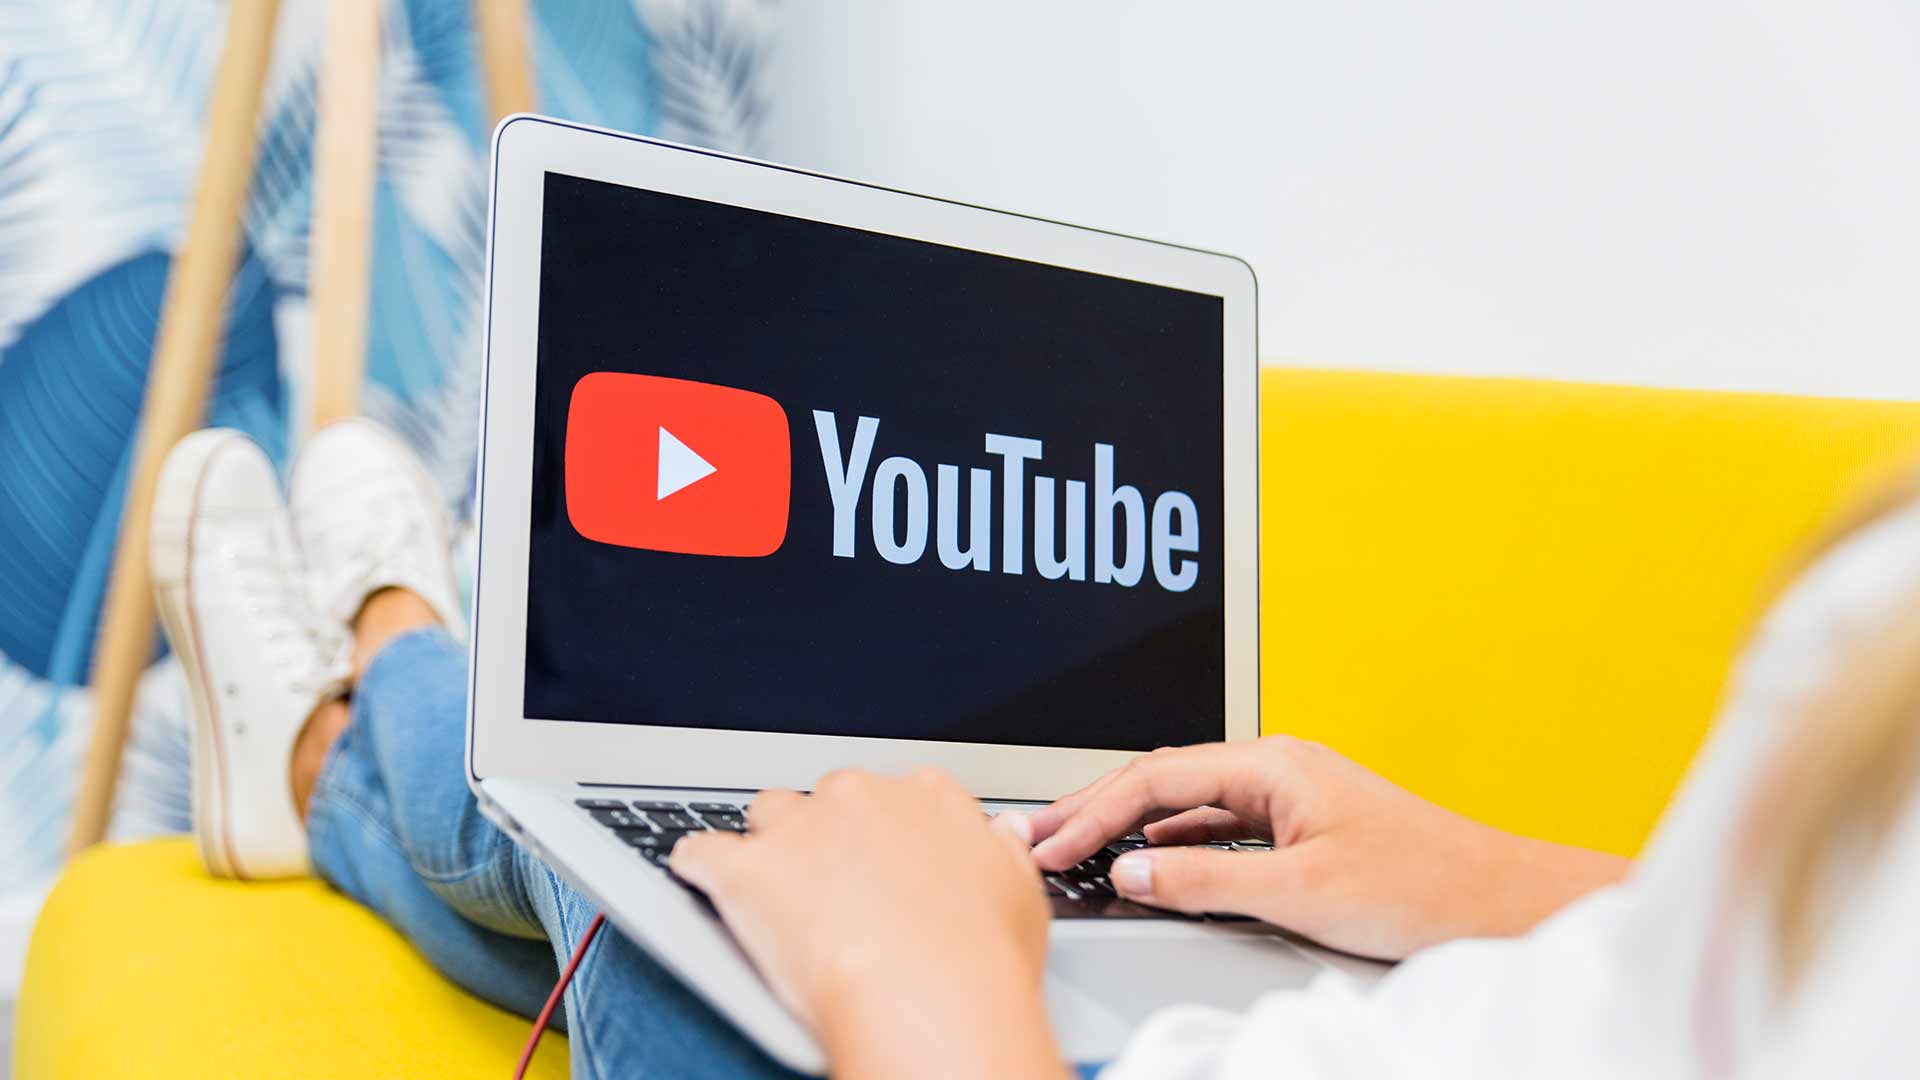 Top 10 Tools for YouTubers and Influencers Work Effectively